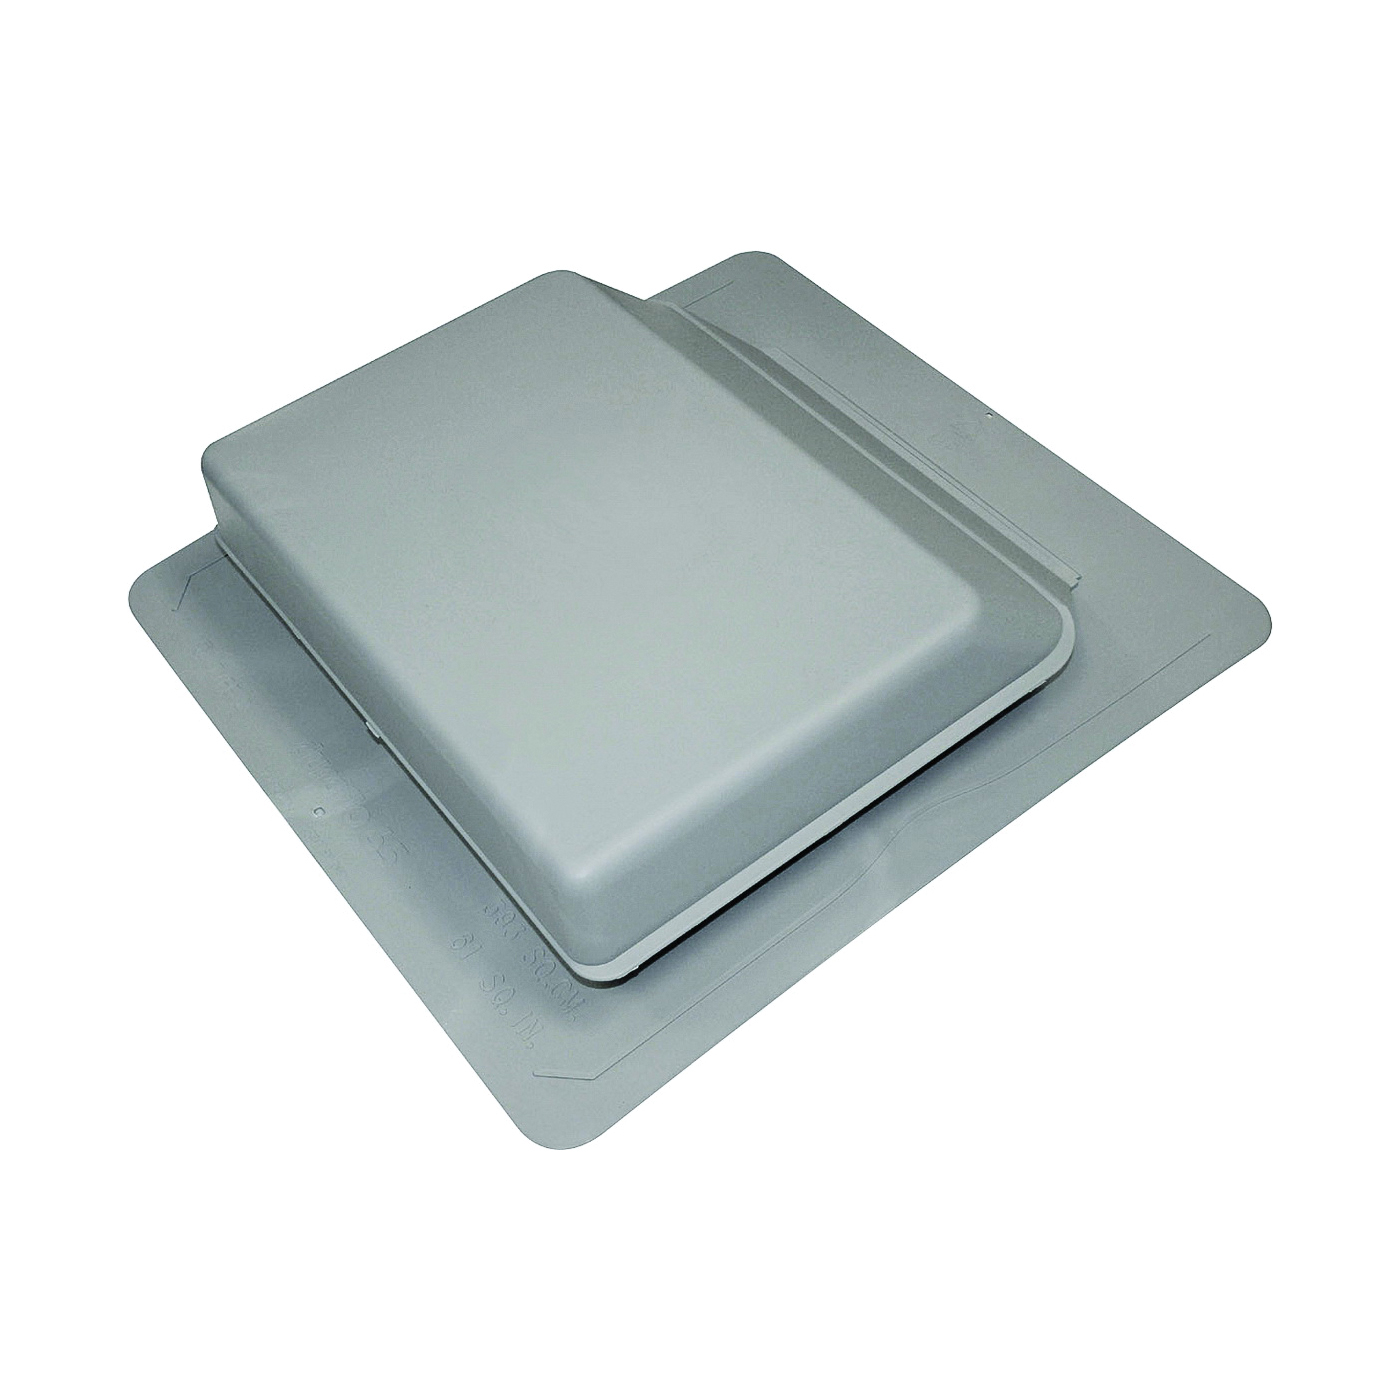 6065G Roof Vent, 17.247 in OAW, 61 sq-in Net Free Ventilating Area, Polypropylene, Gray